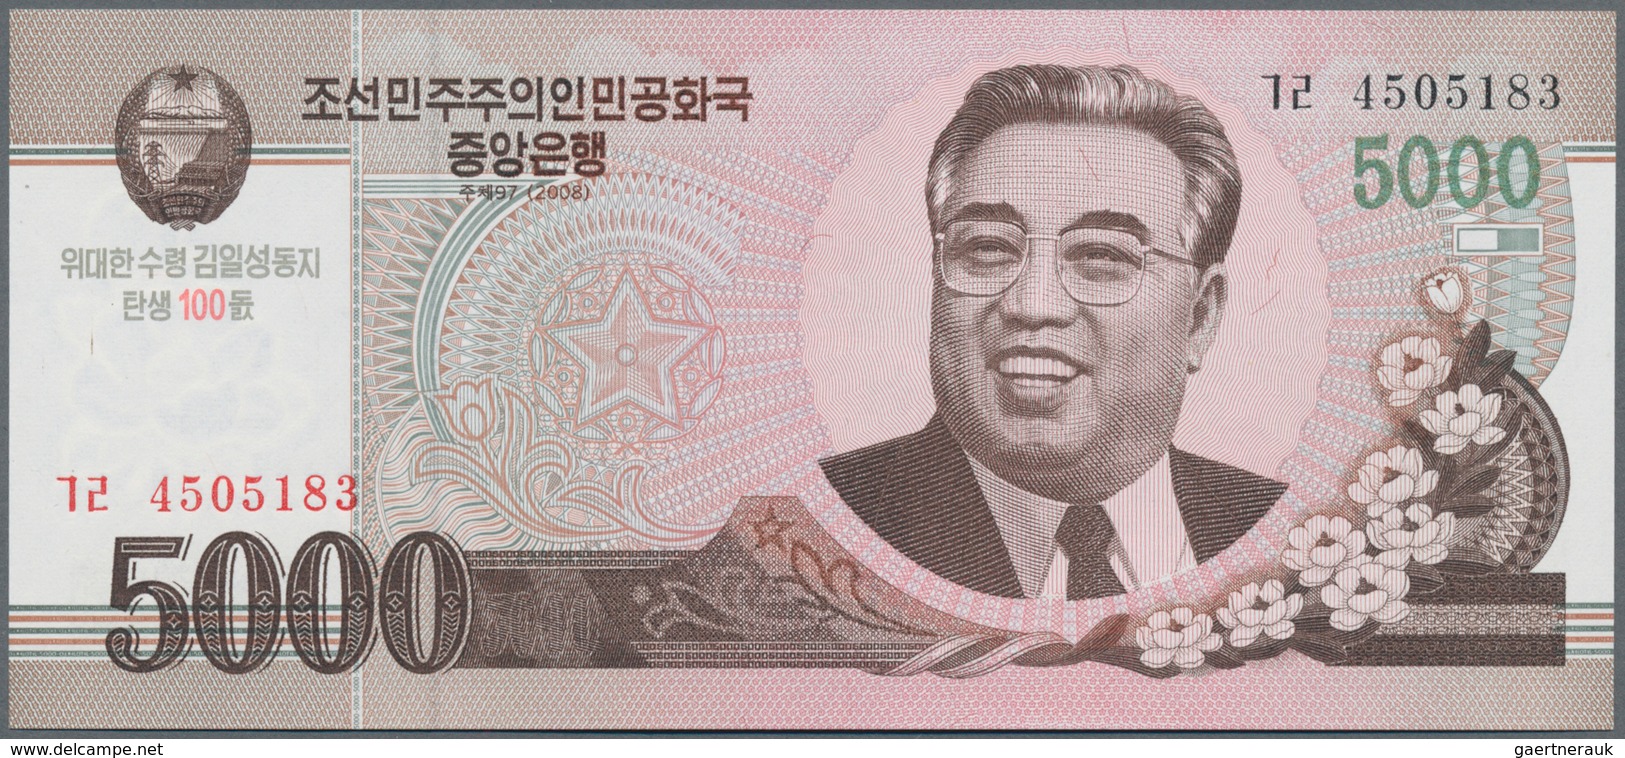 North Korea / Banknoten: Central Bank of the Democratic Peoples Republic of Korea giant lot with 74